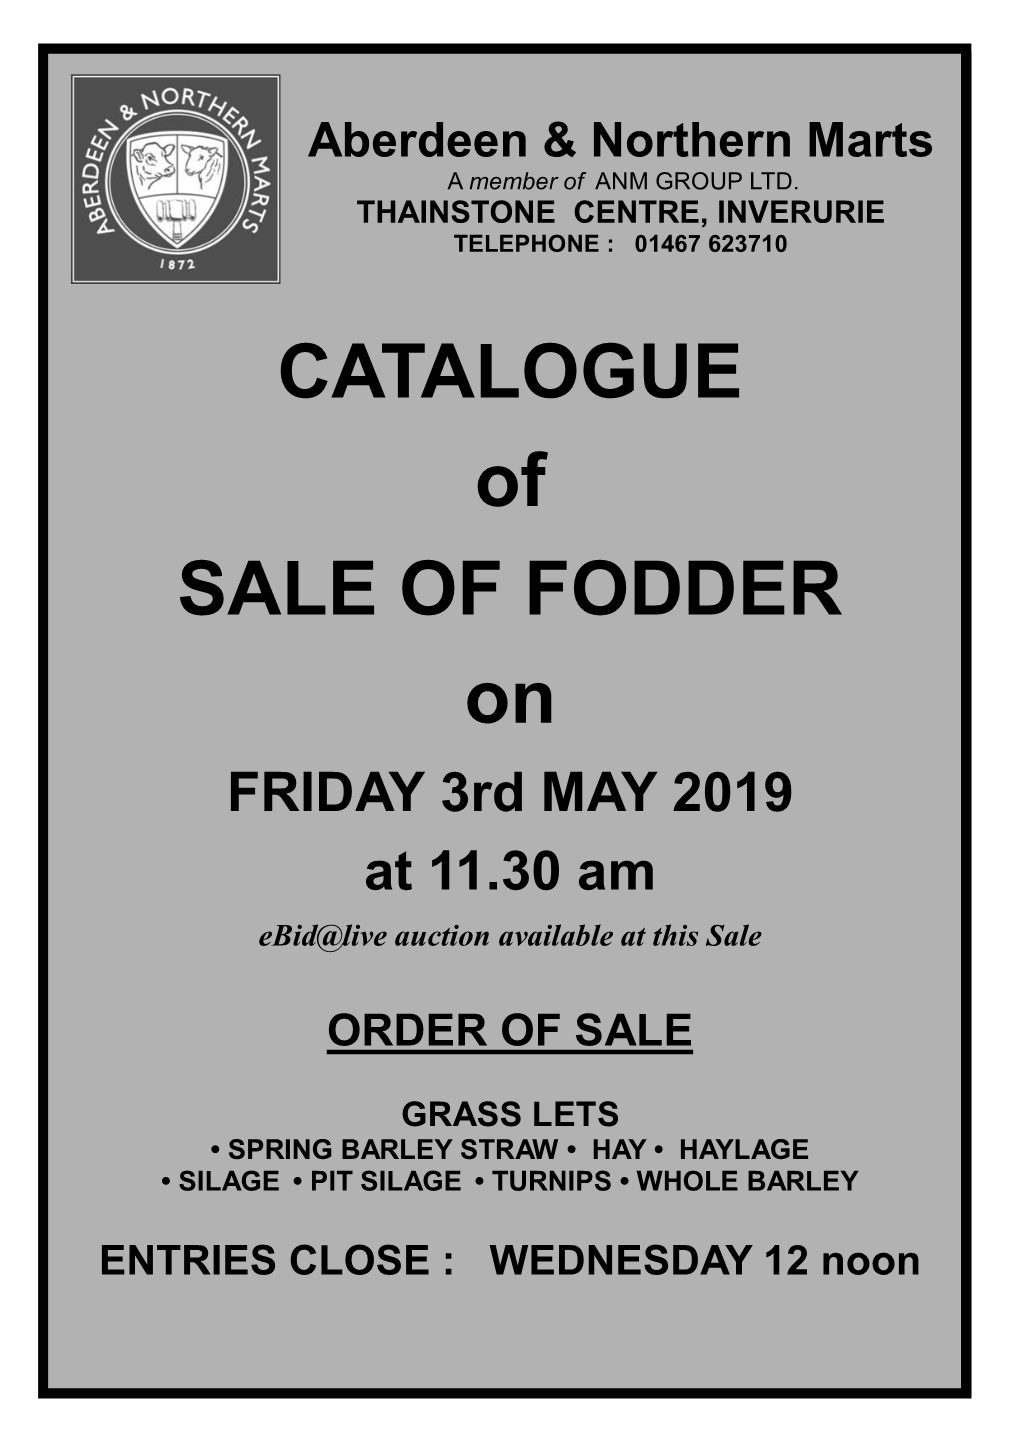 CATALOGUE of SALE of FODDER on FRIDAY 3Rd MAY 2019